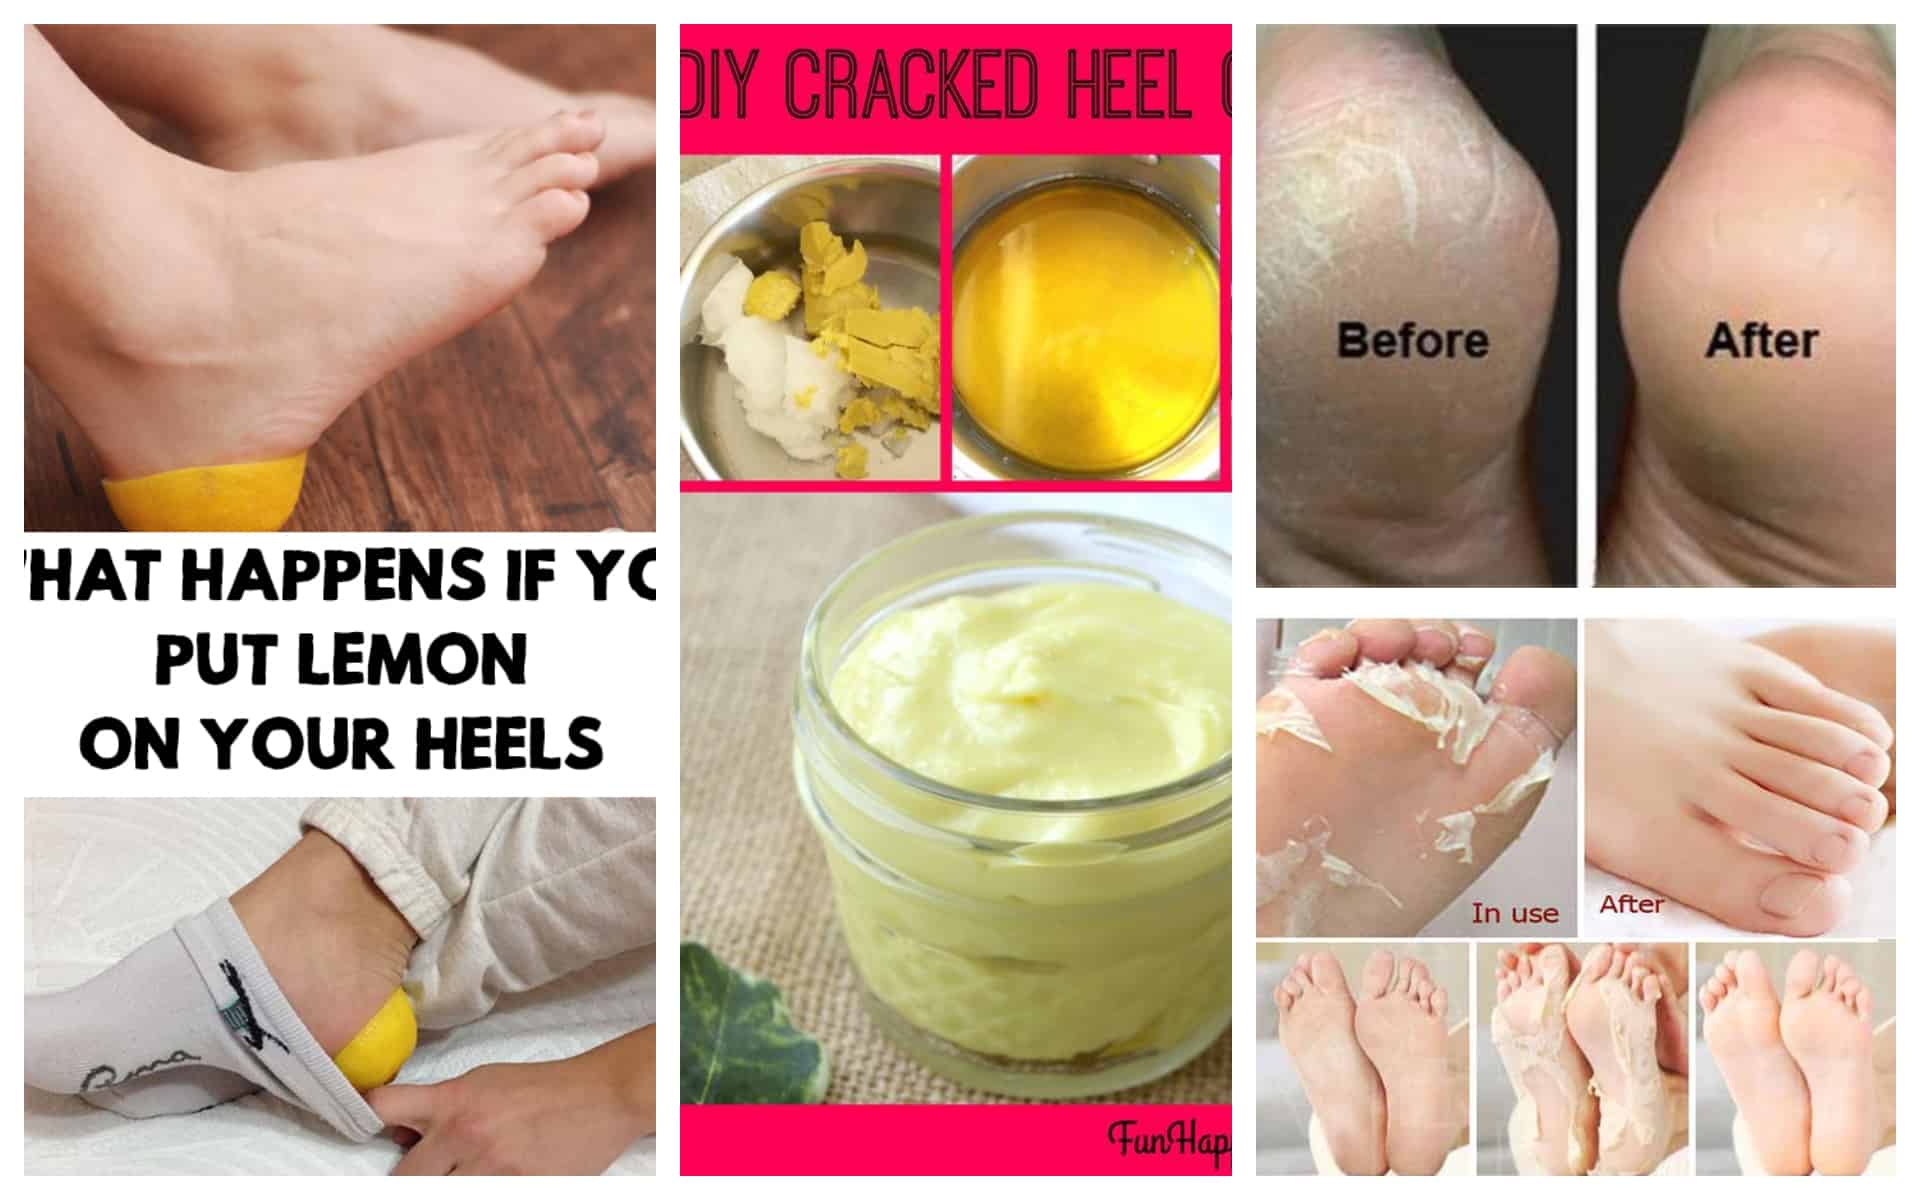 Prevention And Home Remedies For Cracked Heels - Women On Top